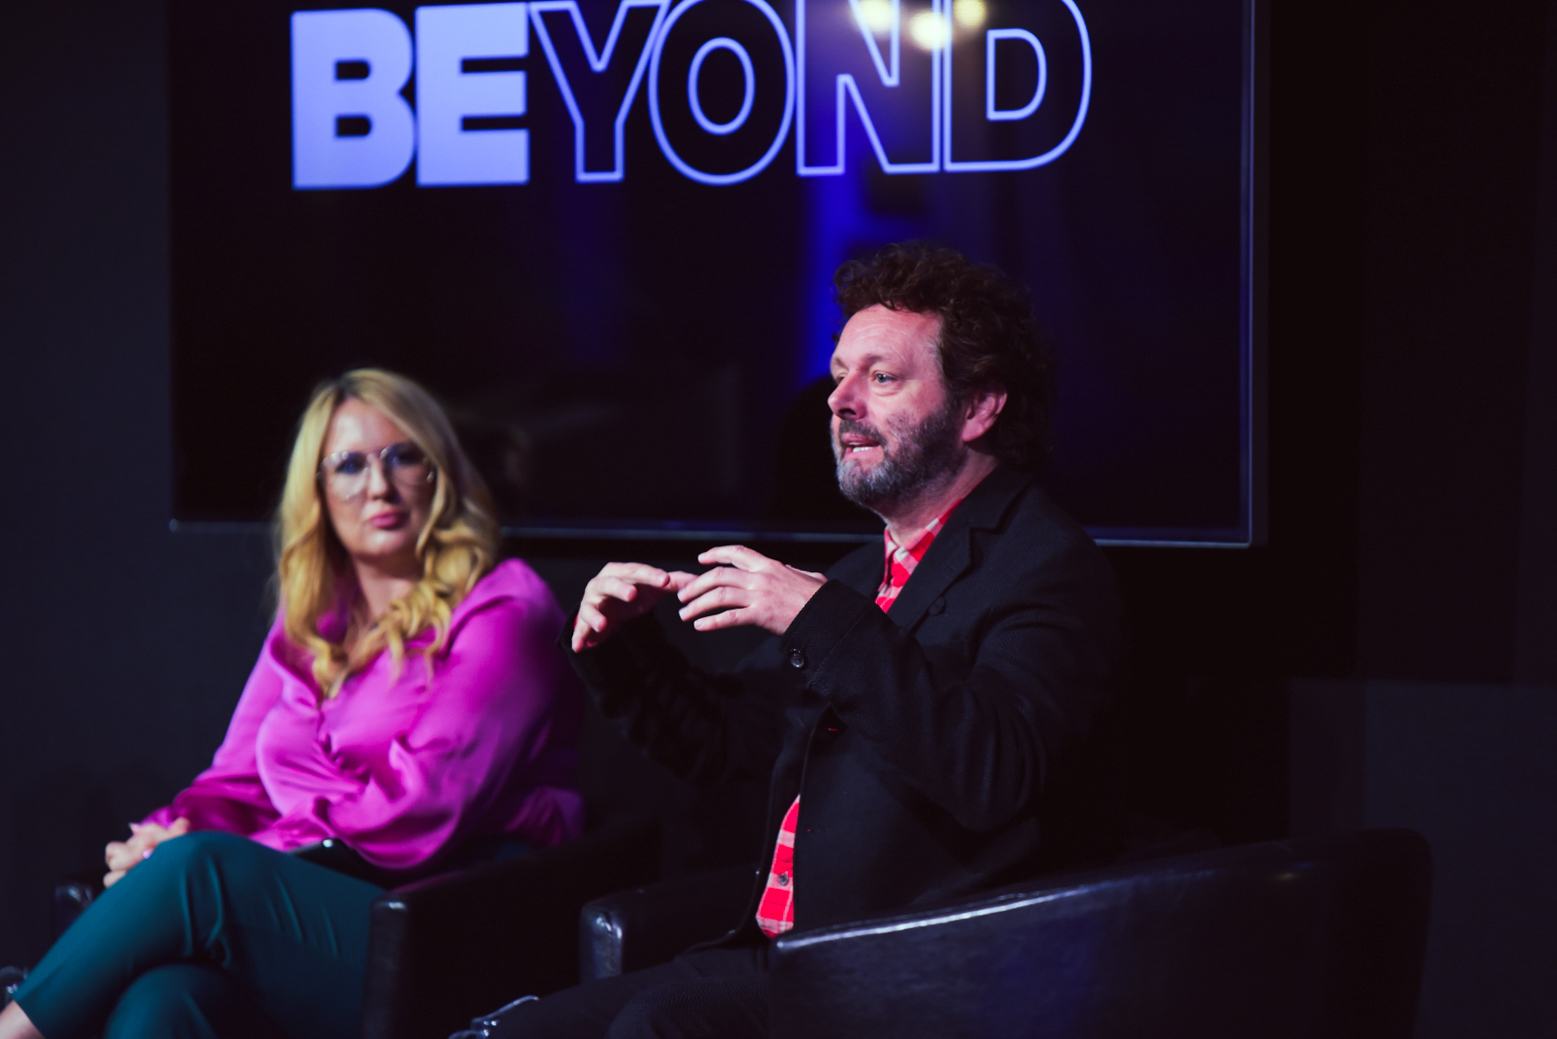 Sophie Howe and Michael Sheen on stage at Beyond conference. They are both sitting down. Michael is mid-speech, Sophie is looking at him